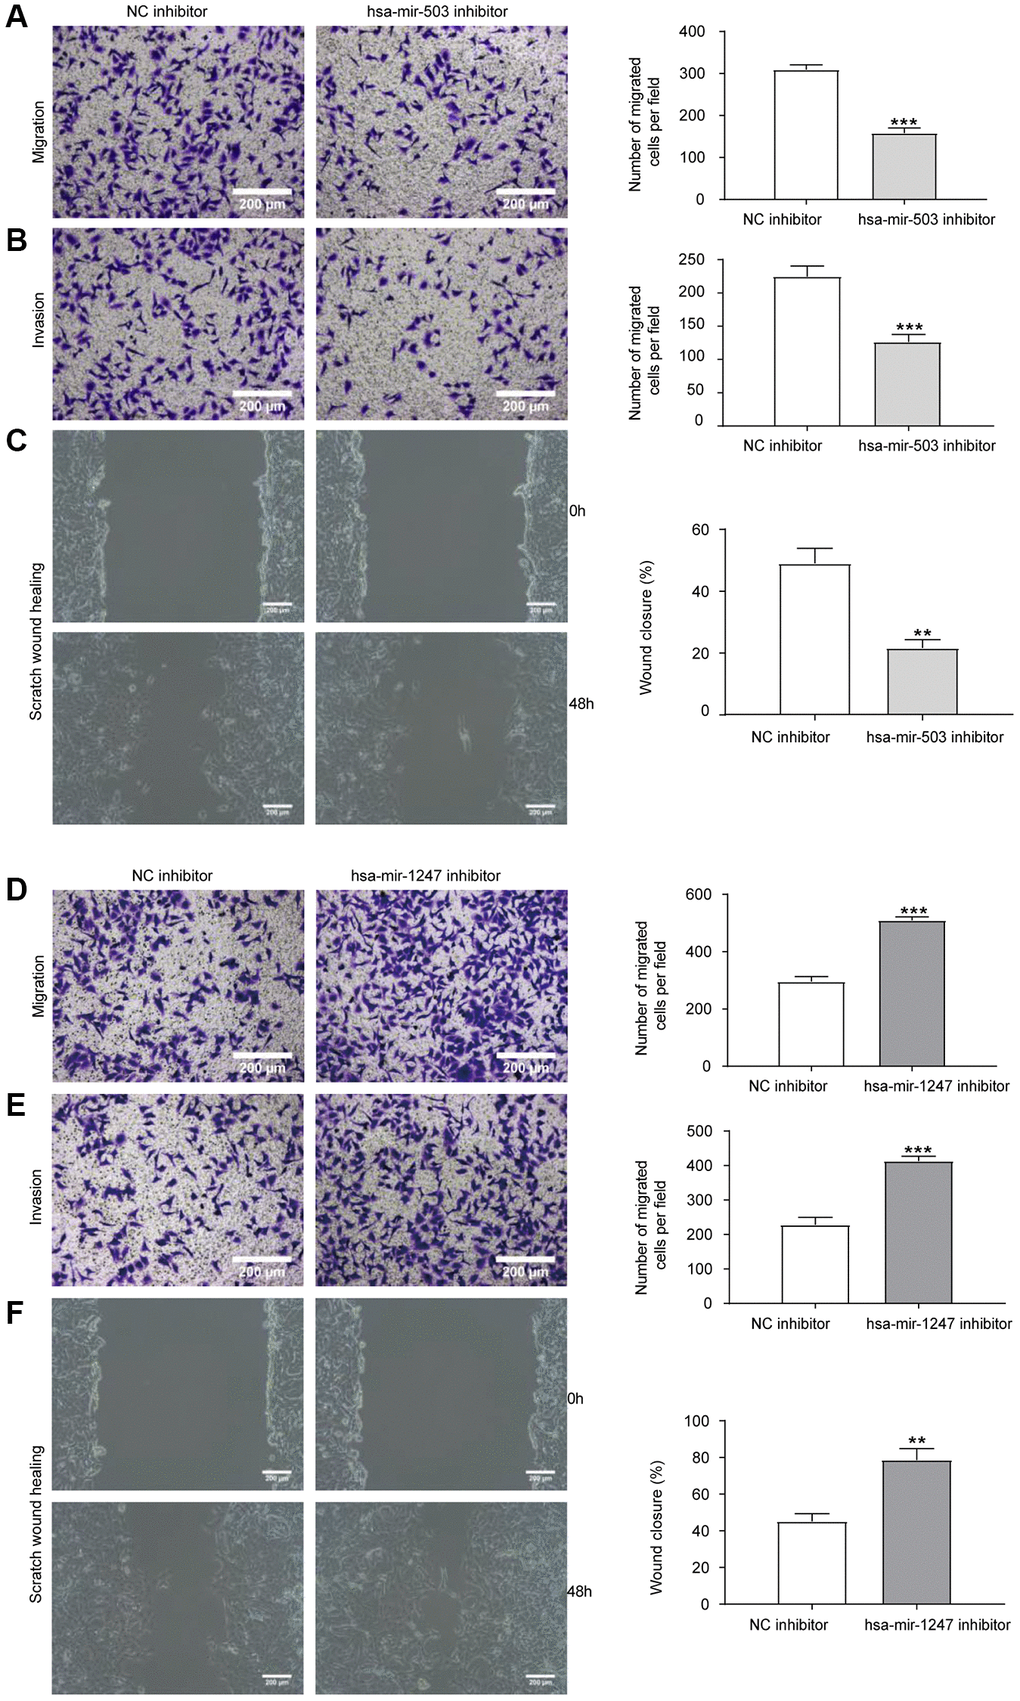 Effects of hsa-mir-503/hsa-mir-1247 knockdown on migration and invasion ability of 22RV1 cells. (A) The migratory ability of 22RV1 cells was significantly suppressed after hsa-mir-503 knockdown. (B) The invasive ability of 22RV1 cells was significantly suppressed after hsa-mir-503 knockdown. (C) Knockdown of hsa-mir-503 inhibited the lateral migration ability of 22RV1 cells. (D) The migratory ability of 22RV1 cells was significantly increased after hsa-mir-1247 knockdown. (E) The invasive ability of 22RV1 cells was significantly increased after hsa-mir-1247 knockdown. (F) Knockdown of hsa-mir-1247 promoted the lateral migration ability of 22RV1 cells (*p **p ***p 